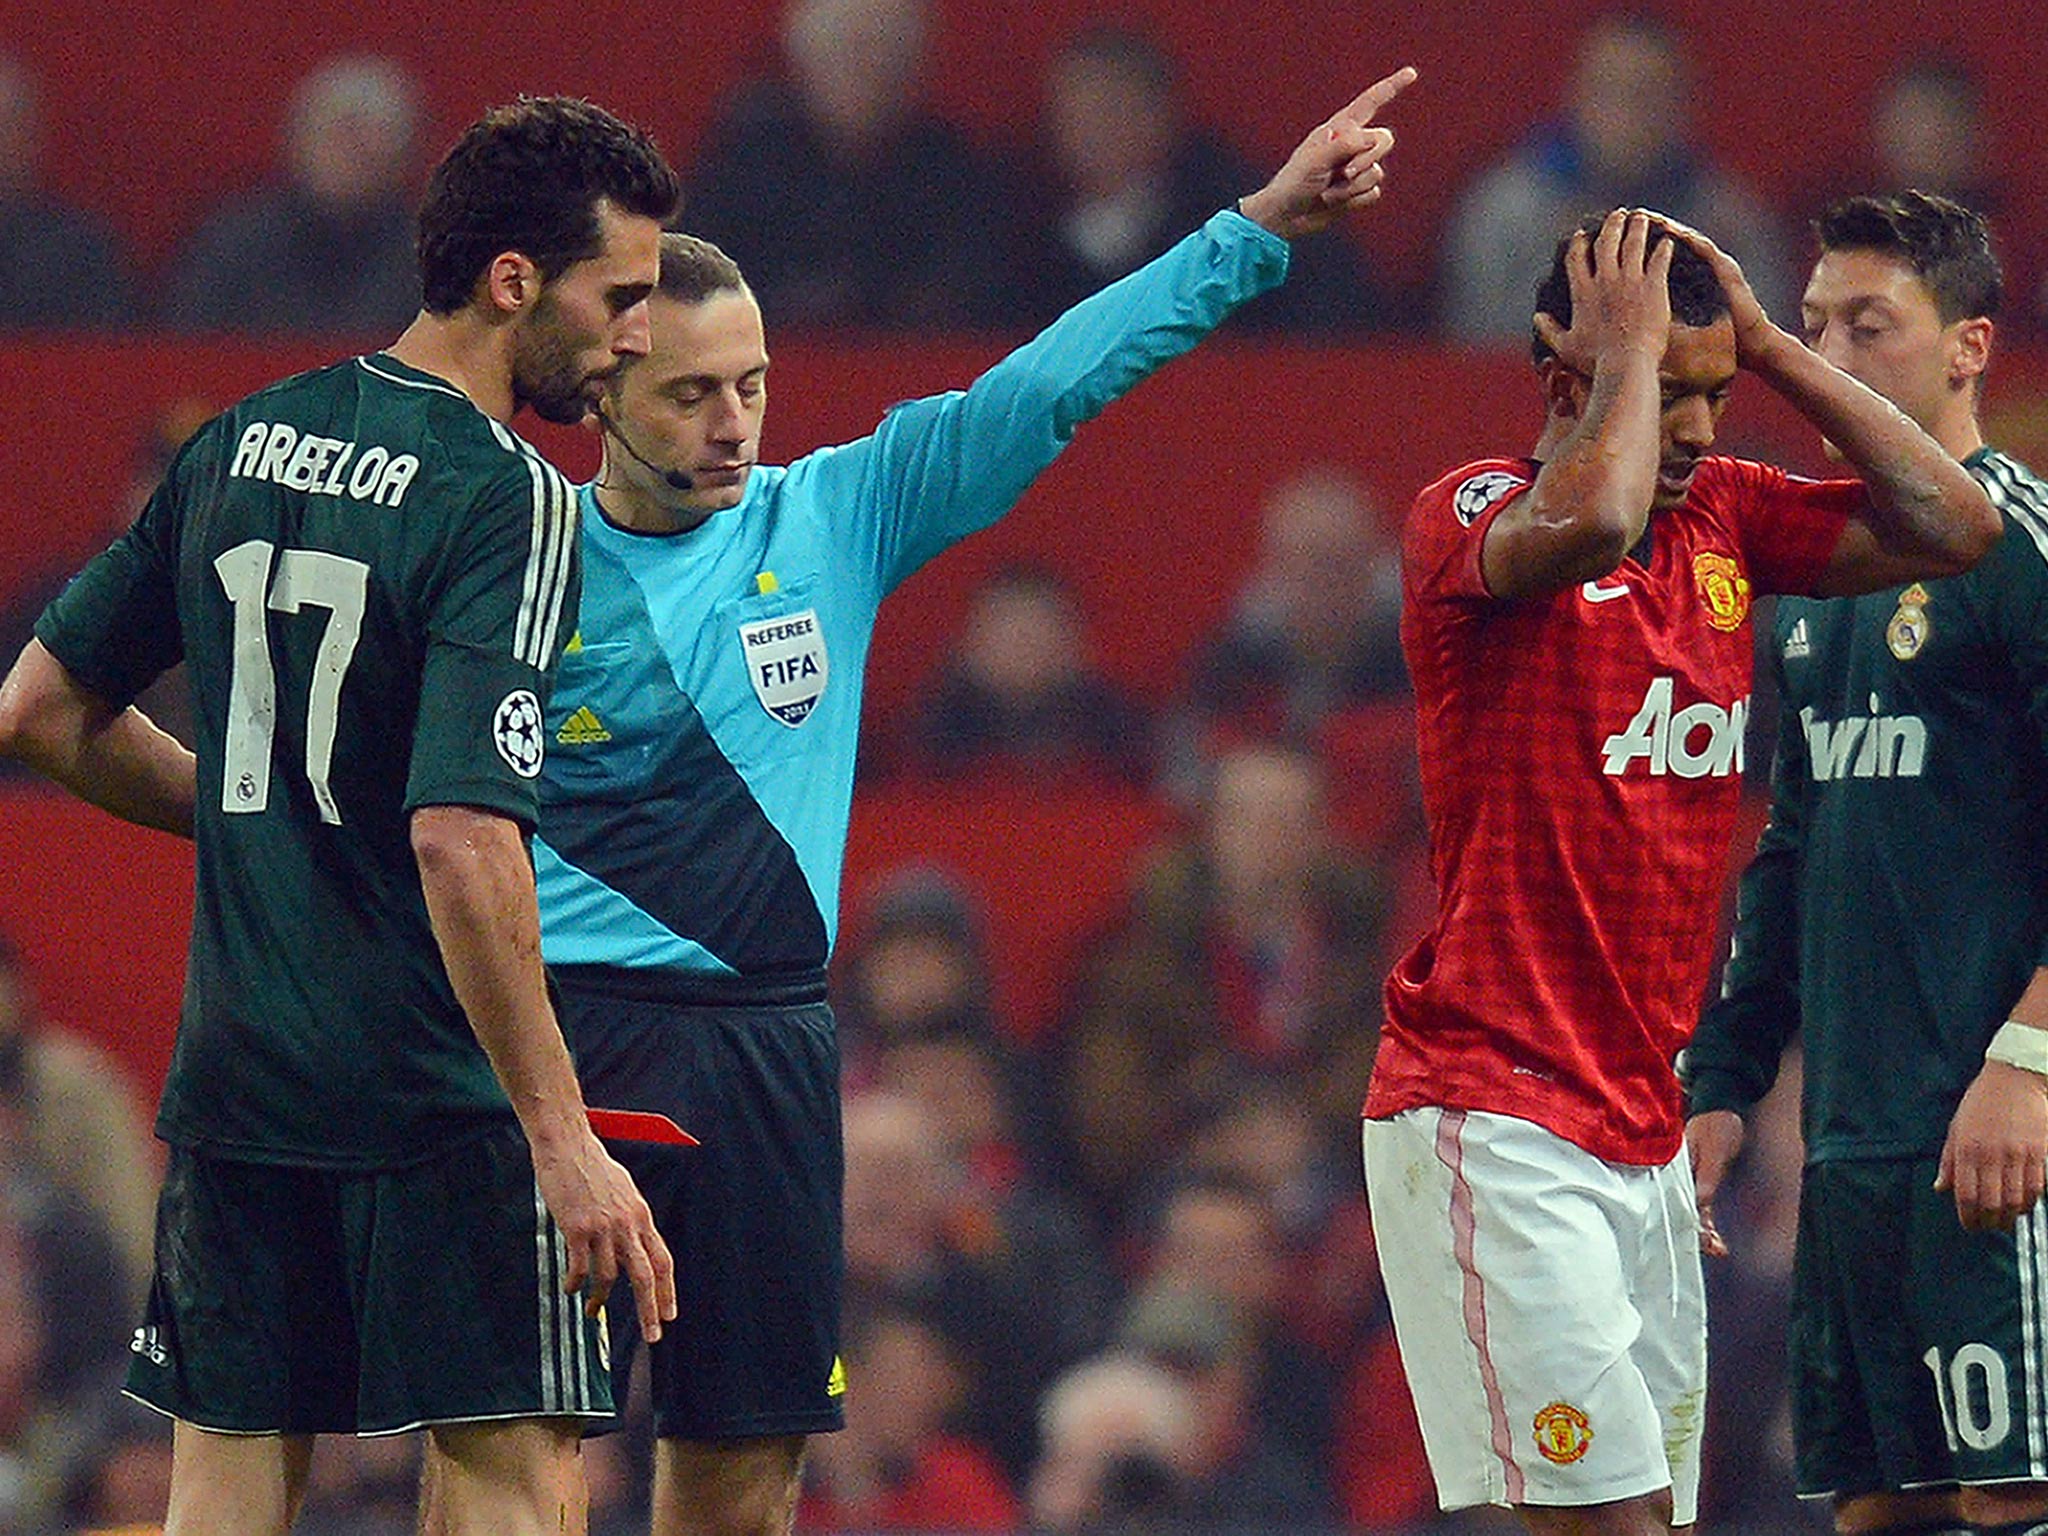 Cuneyt Cakir shows Nani a red card